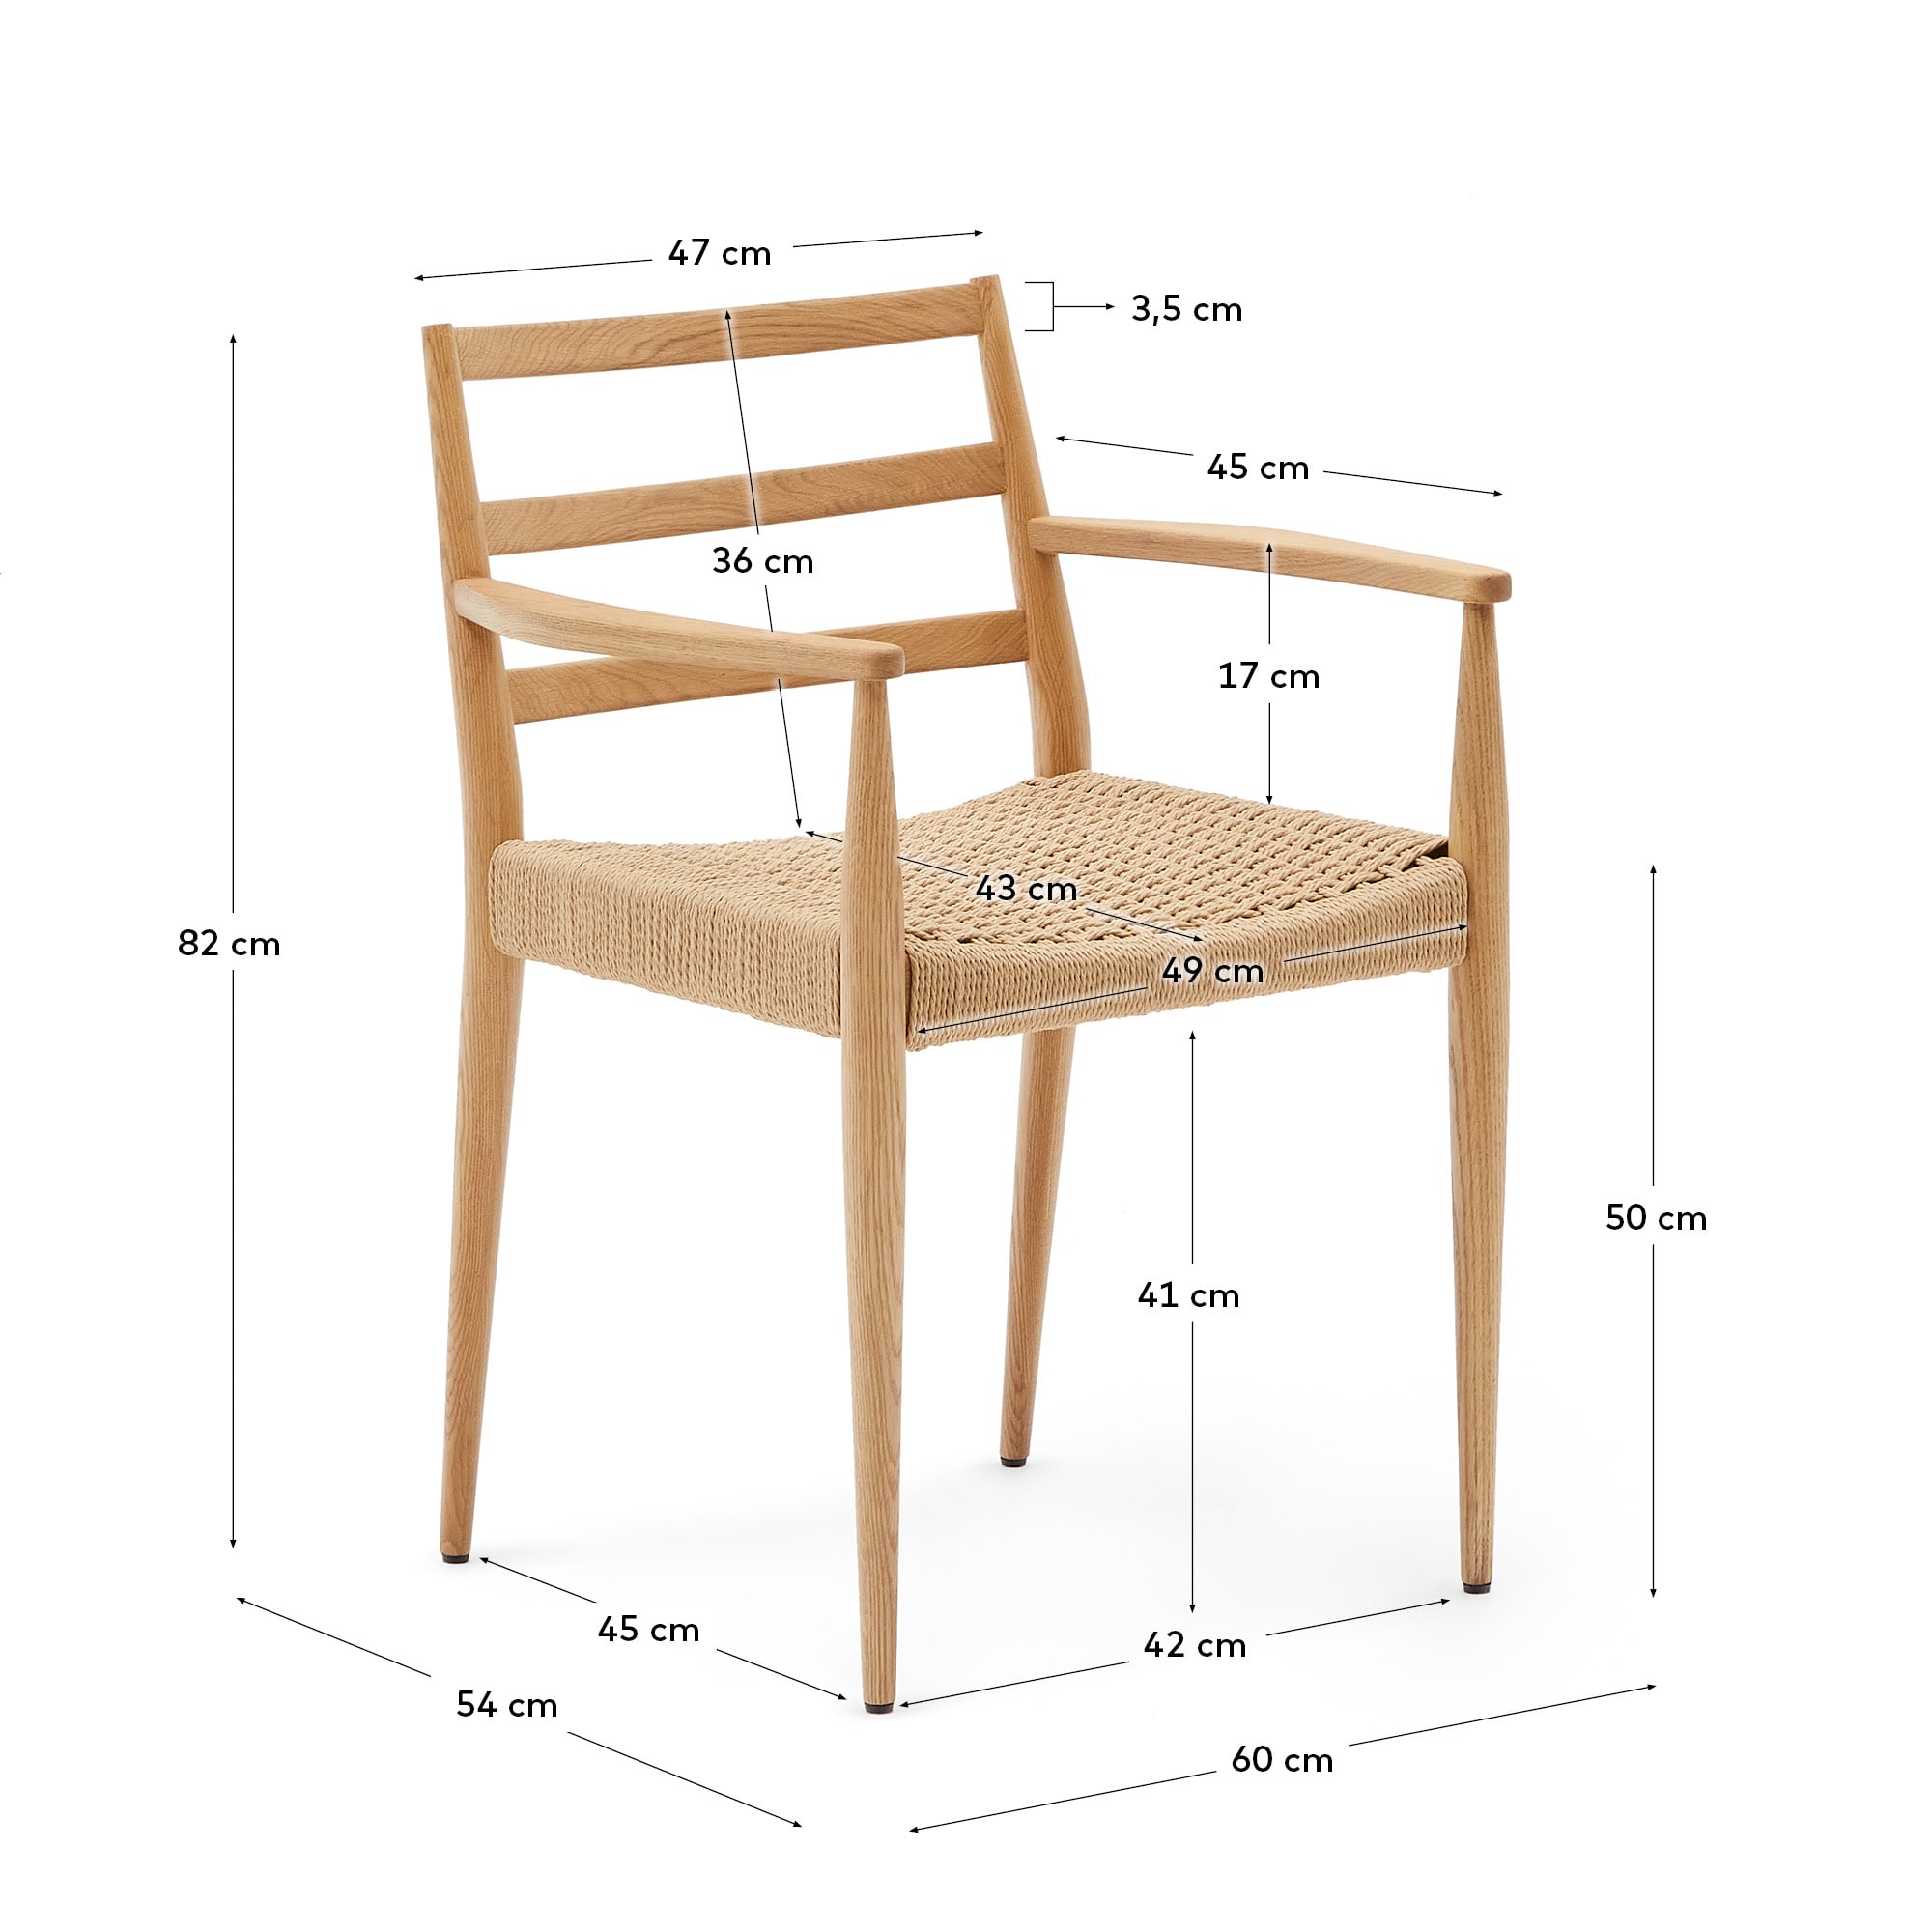 Analy chair with armrests in solid oak wood in a 100% FSC natural finish and rope cord seat - 크기